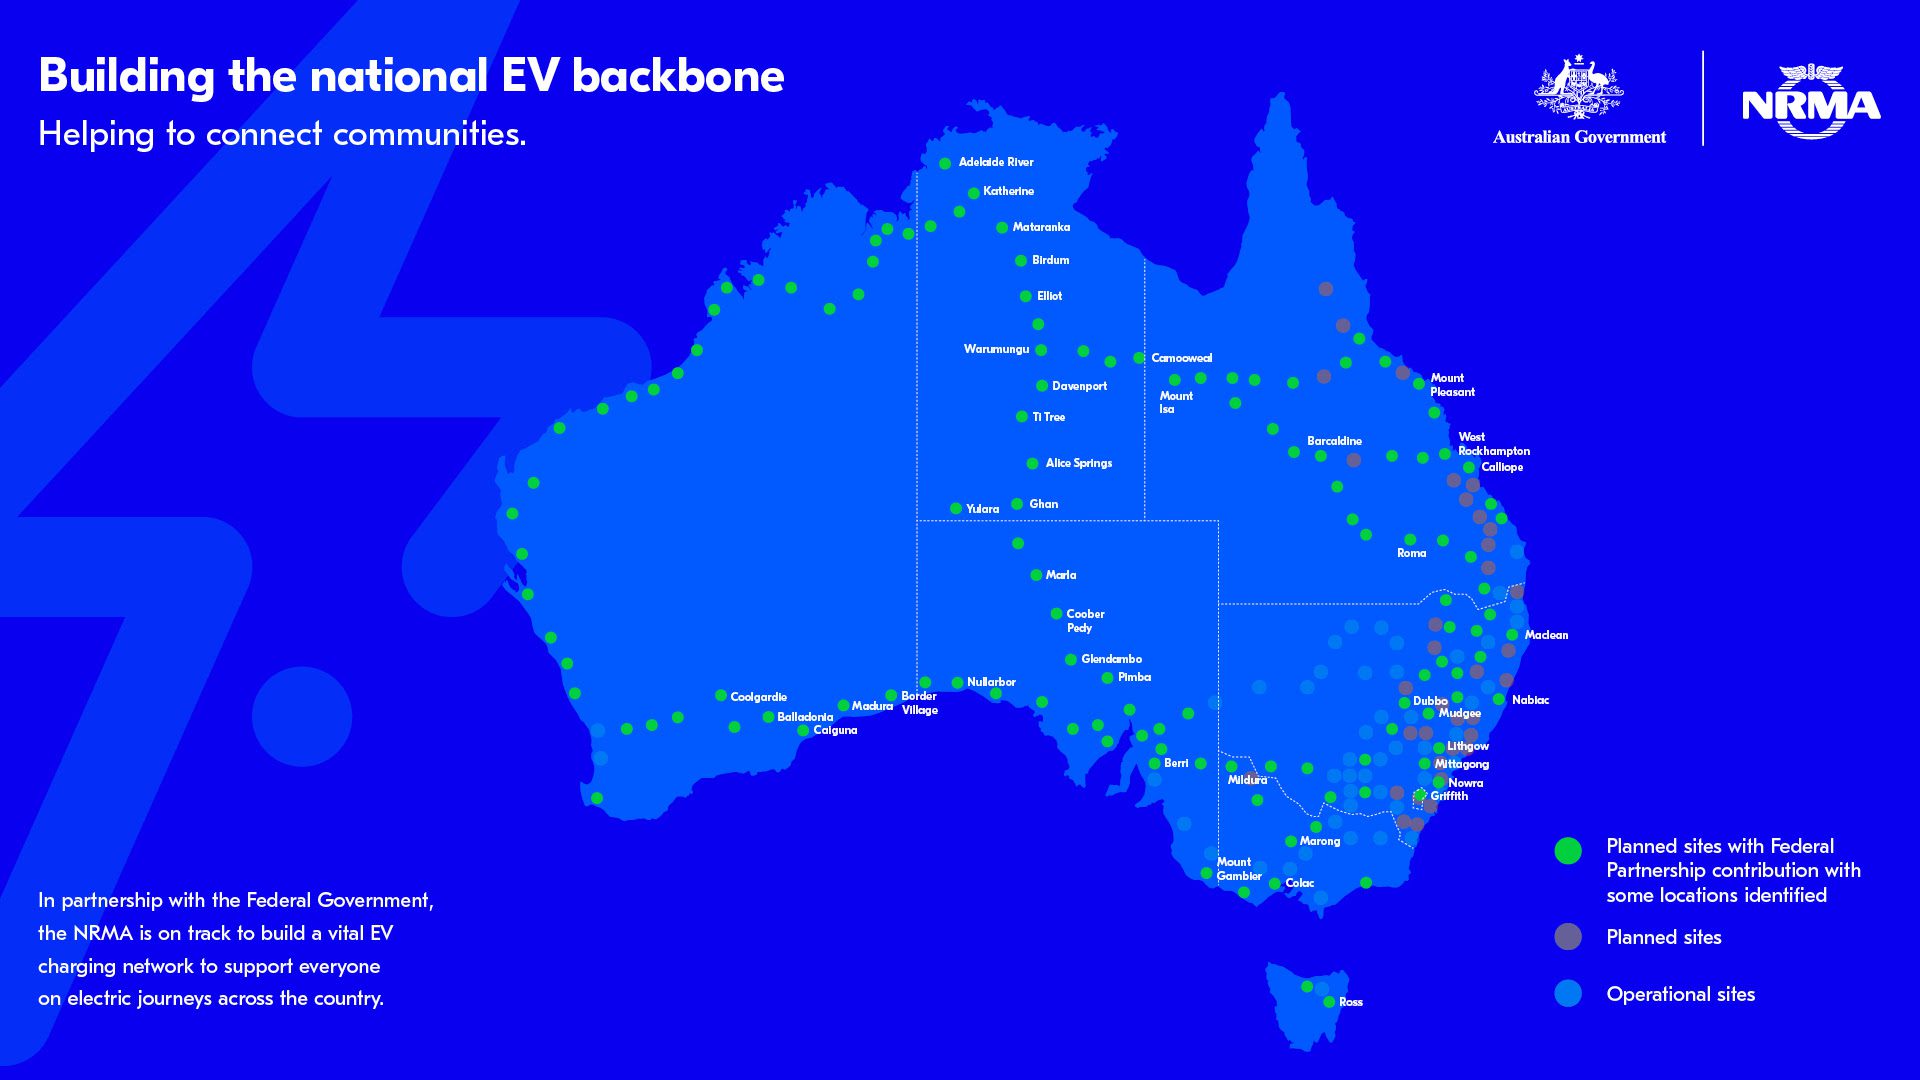 NRMA gets funding for 117 new fast-charging stations across Australia